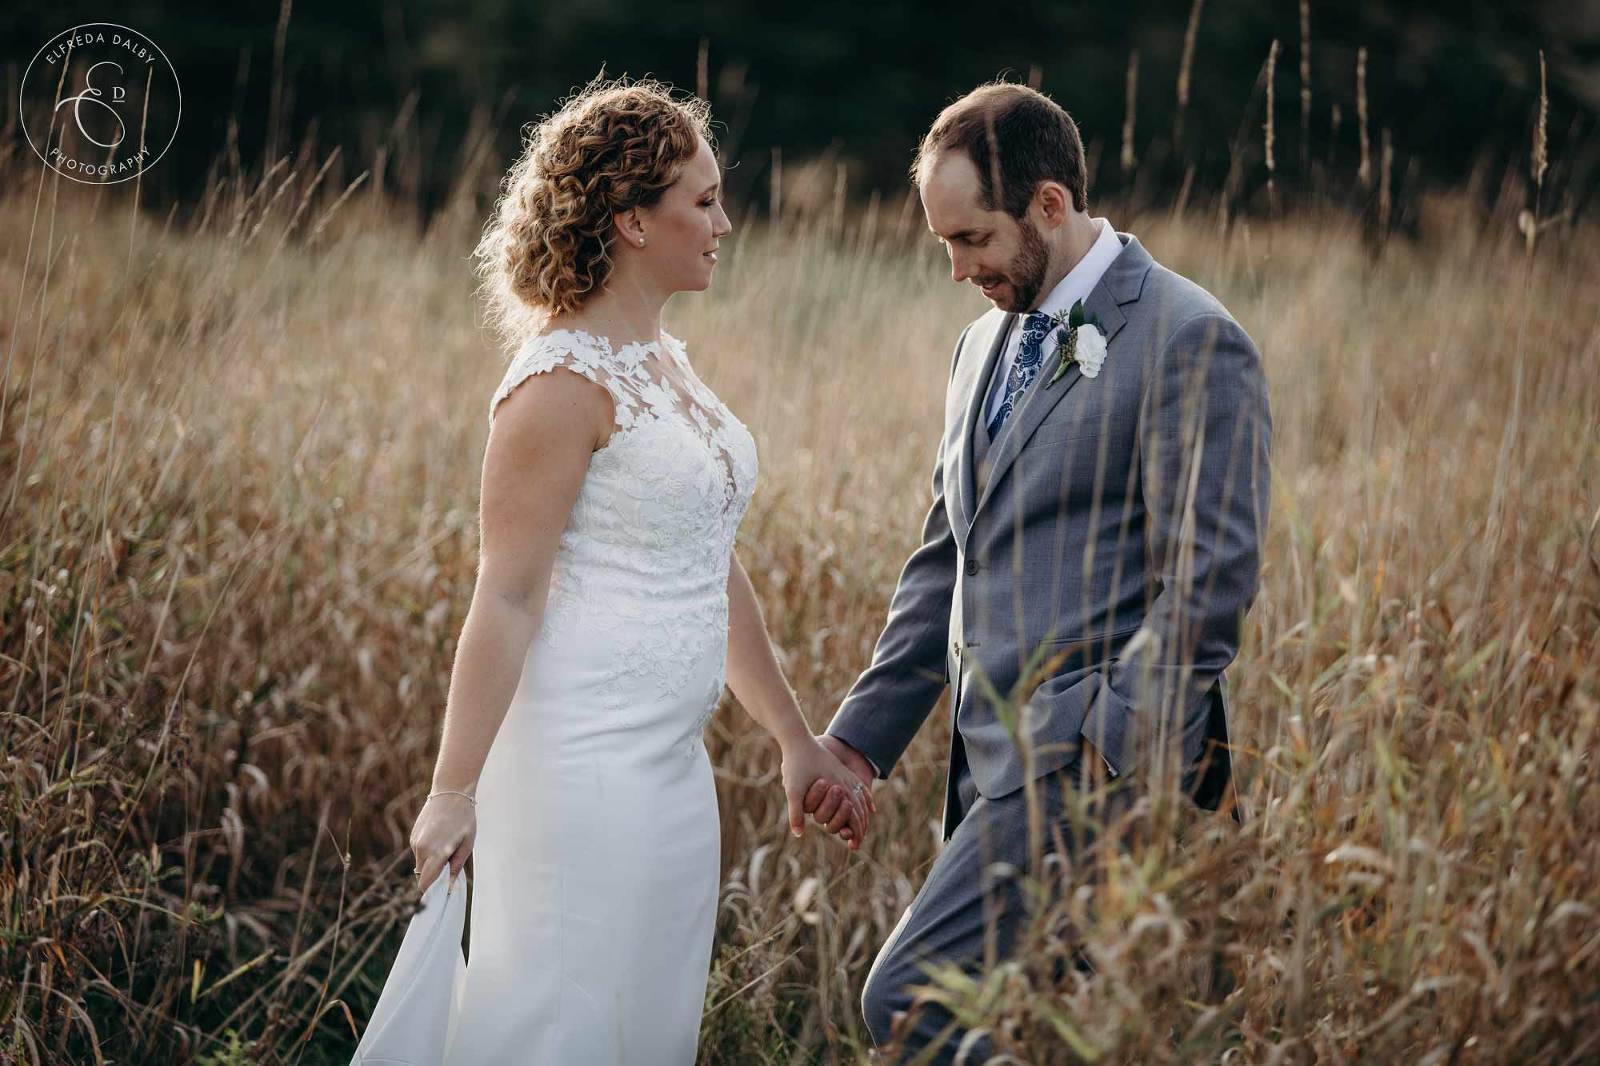 Wedding couple standing in tall grass during sunset